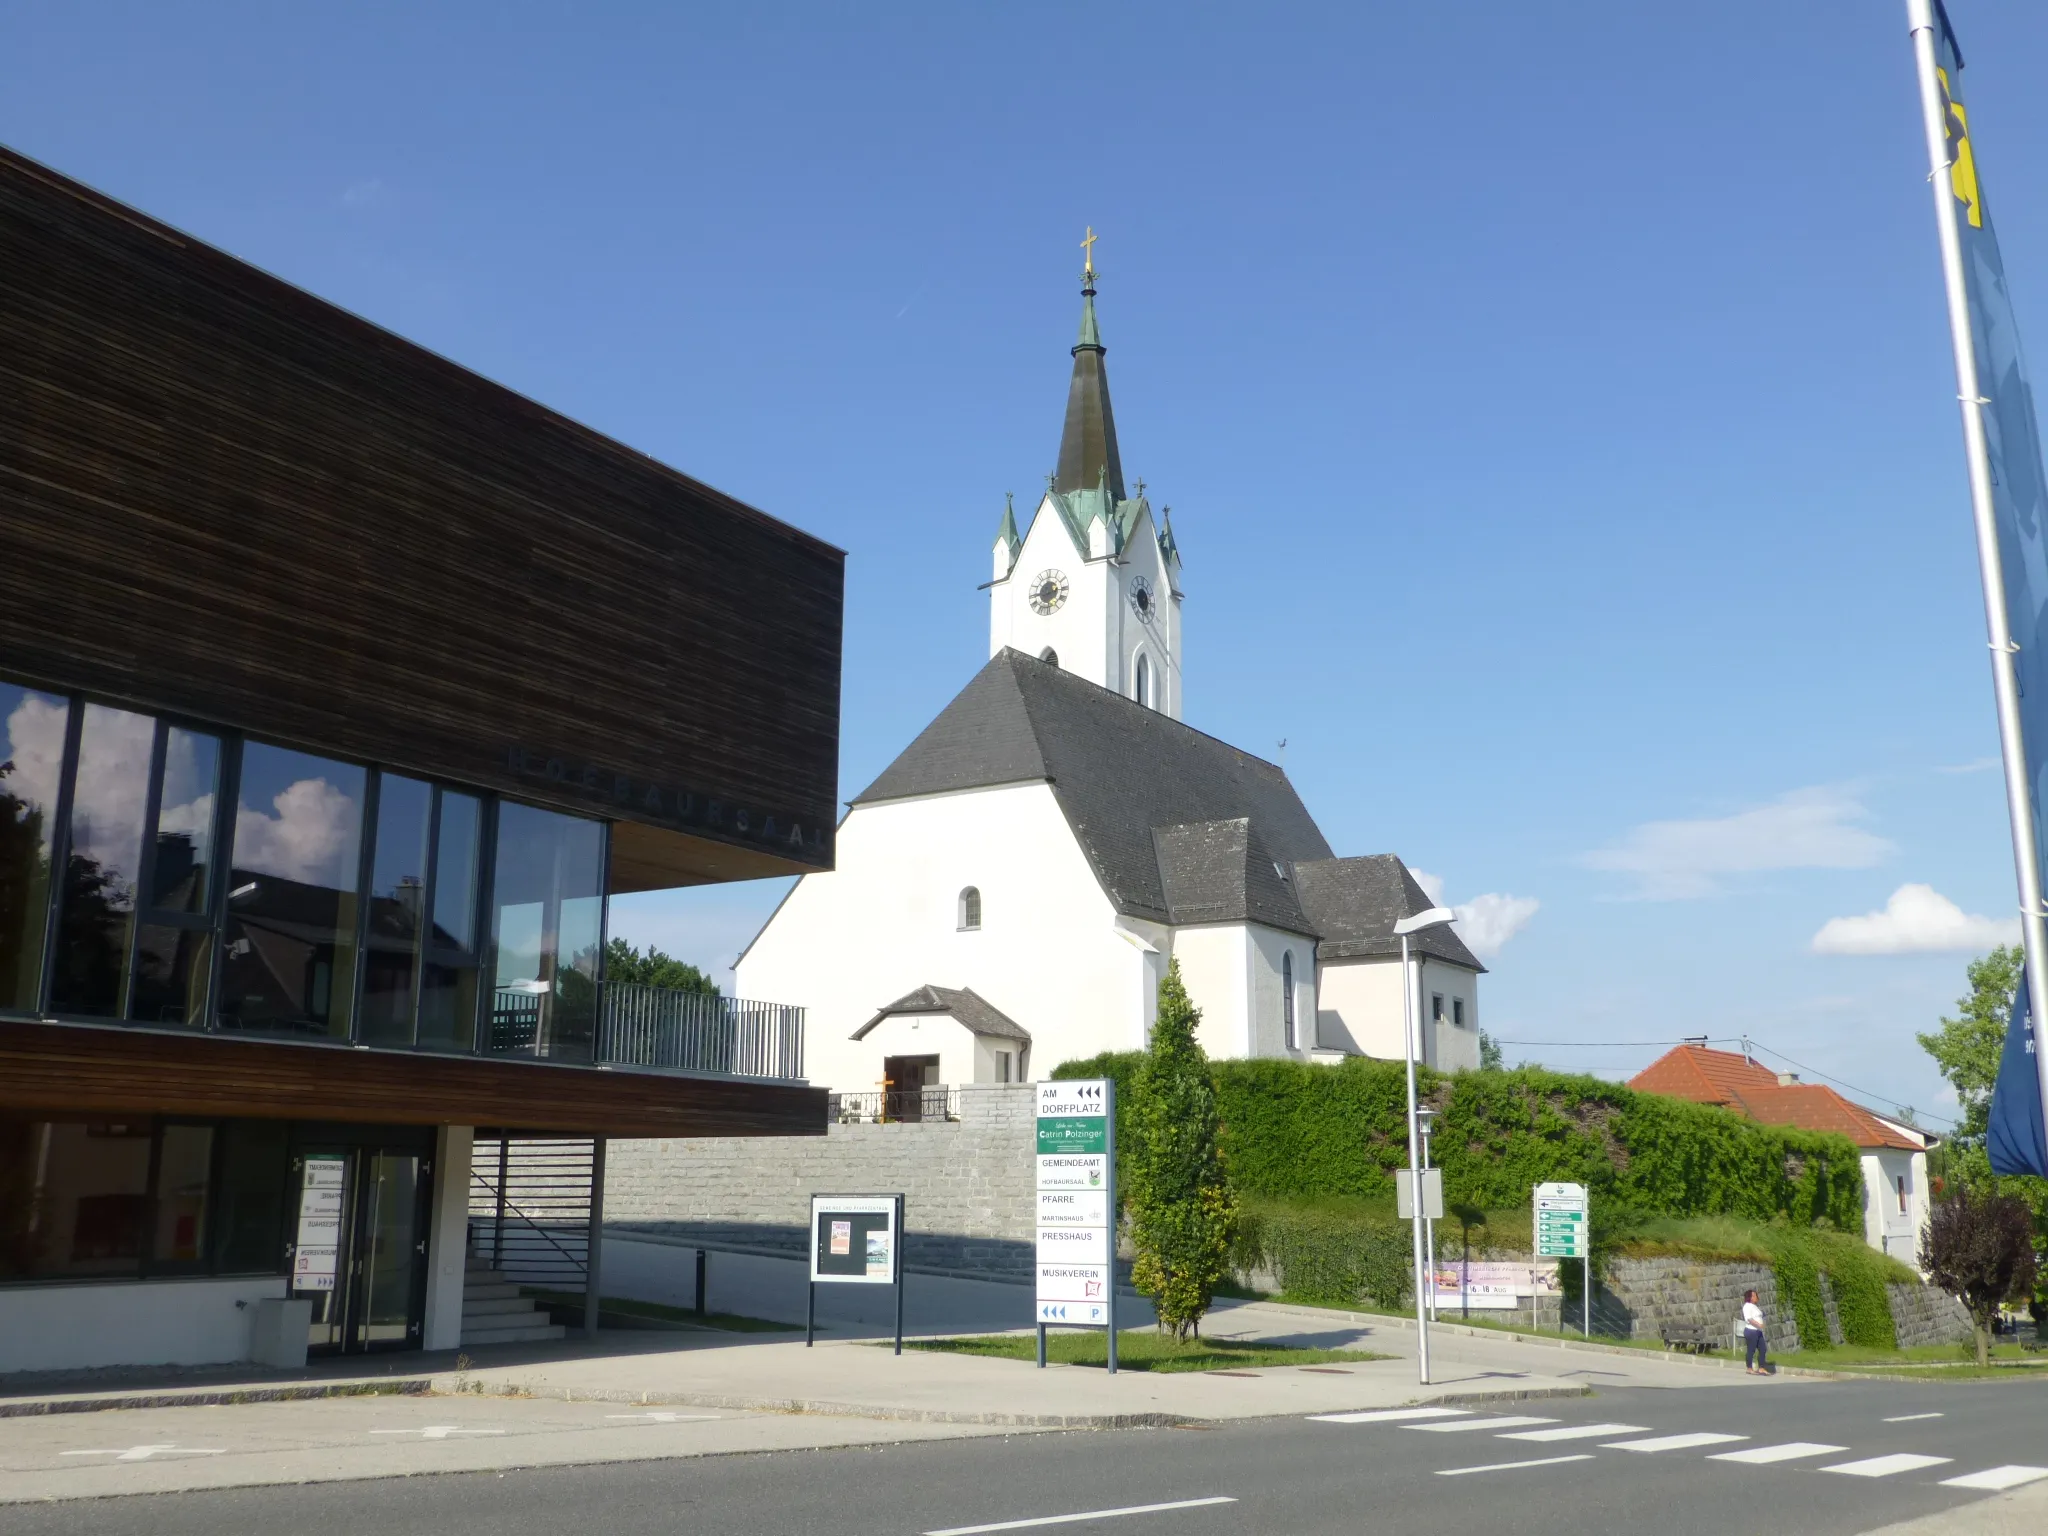 Photo showing: Main church and Town hall at Meggenhofen, Upper Austria.